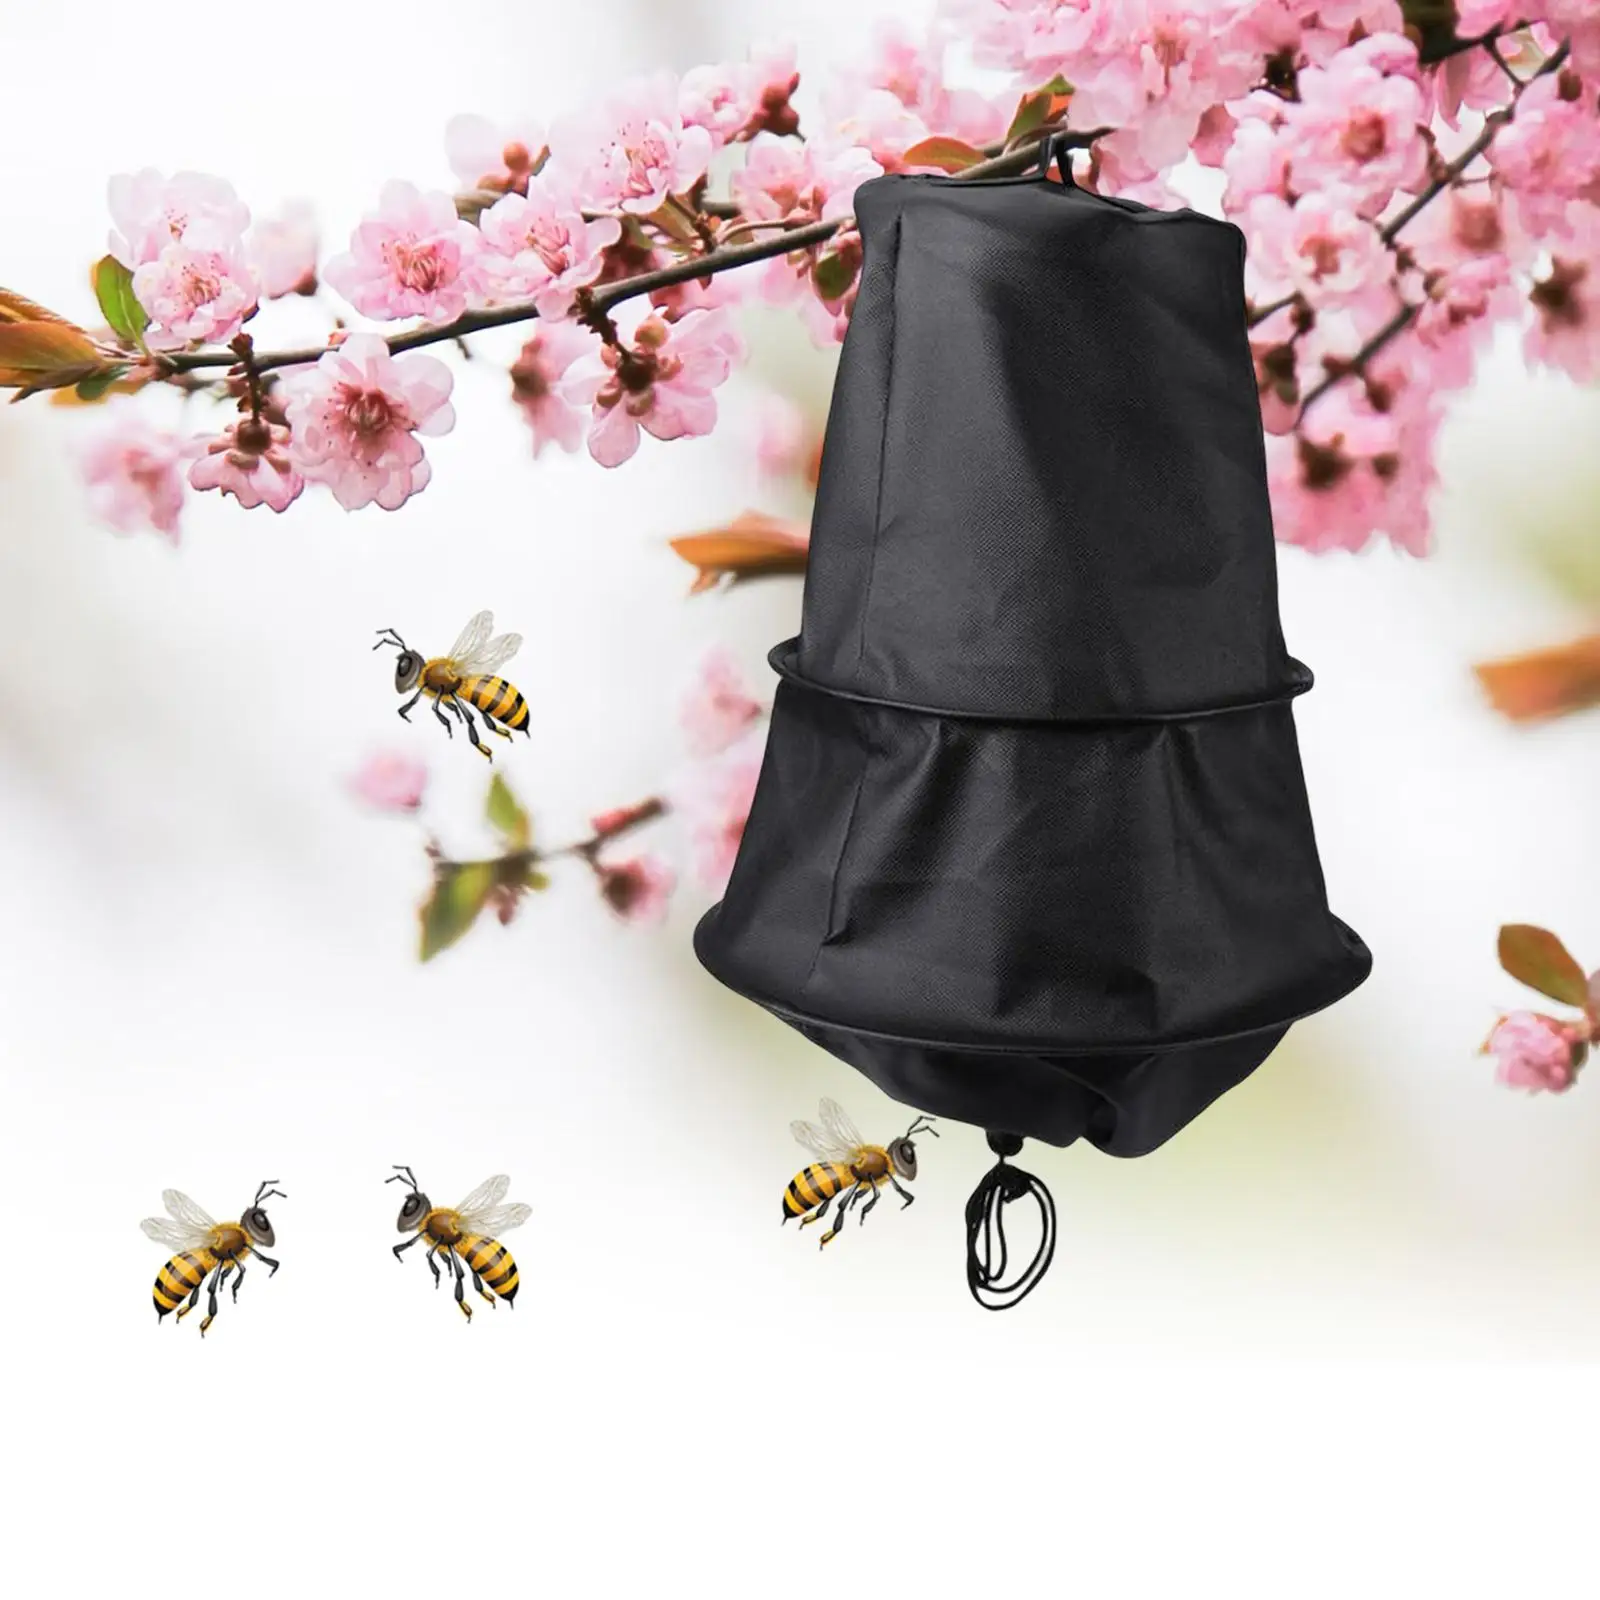 Black Swarm Trap Bee Cage Beekeeping Catching Tool Reusable Soft Loop On Top Swarming Catcher Accessories Safe Beekeeper Tool